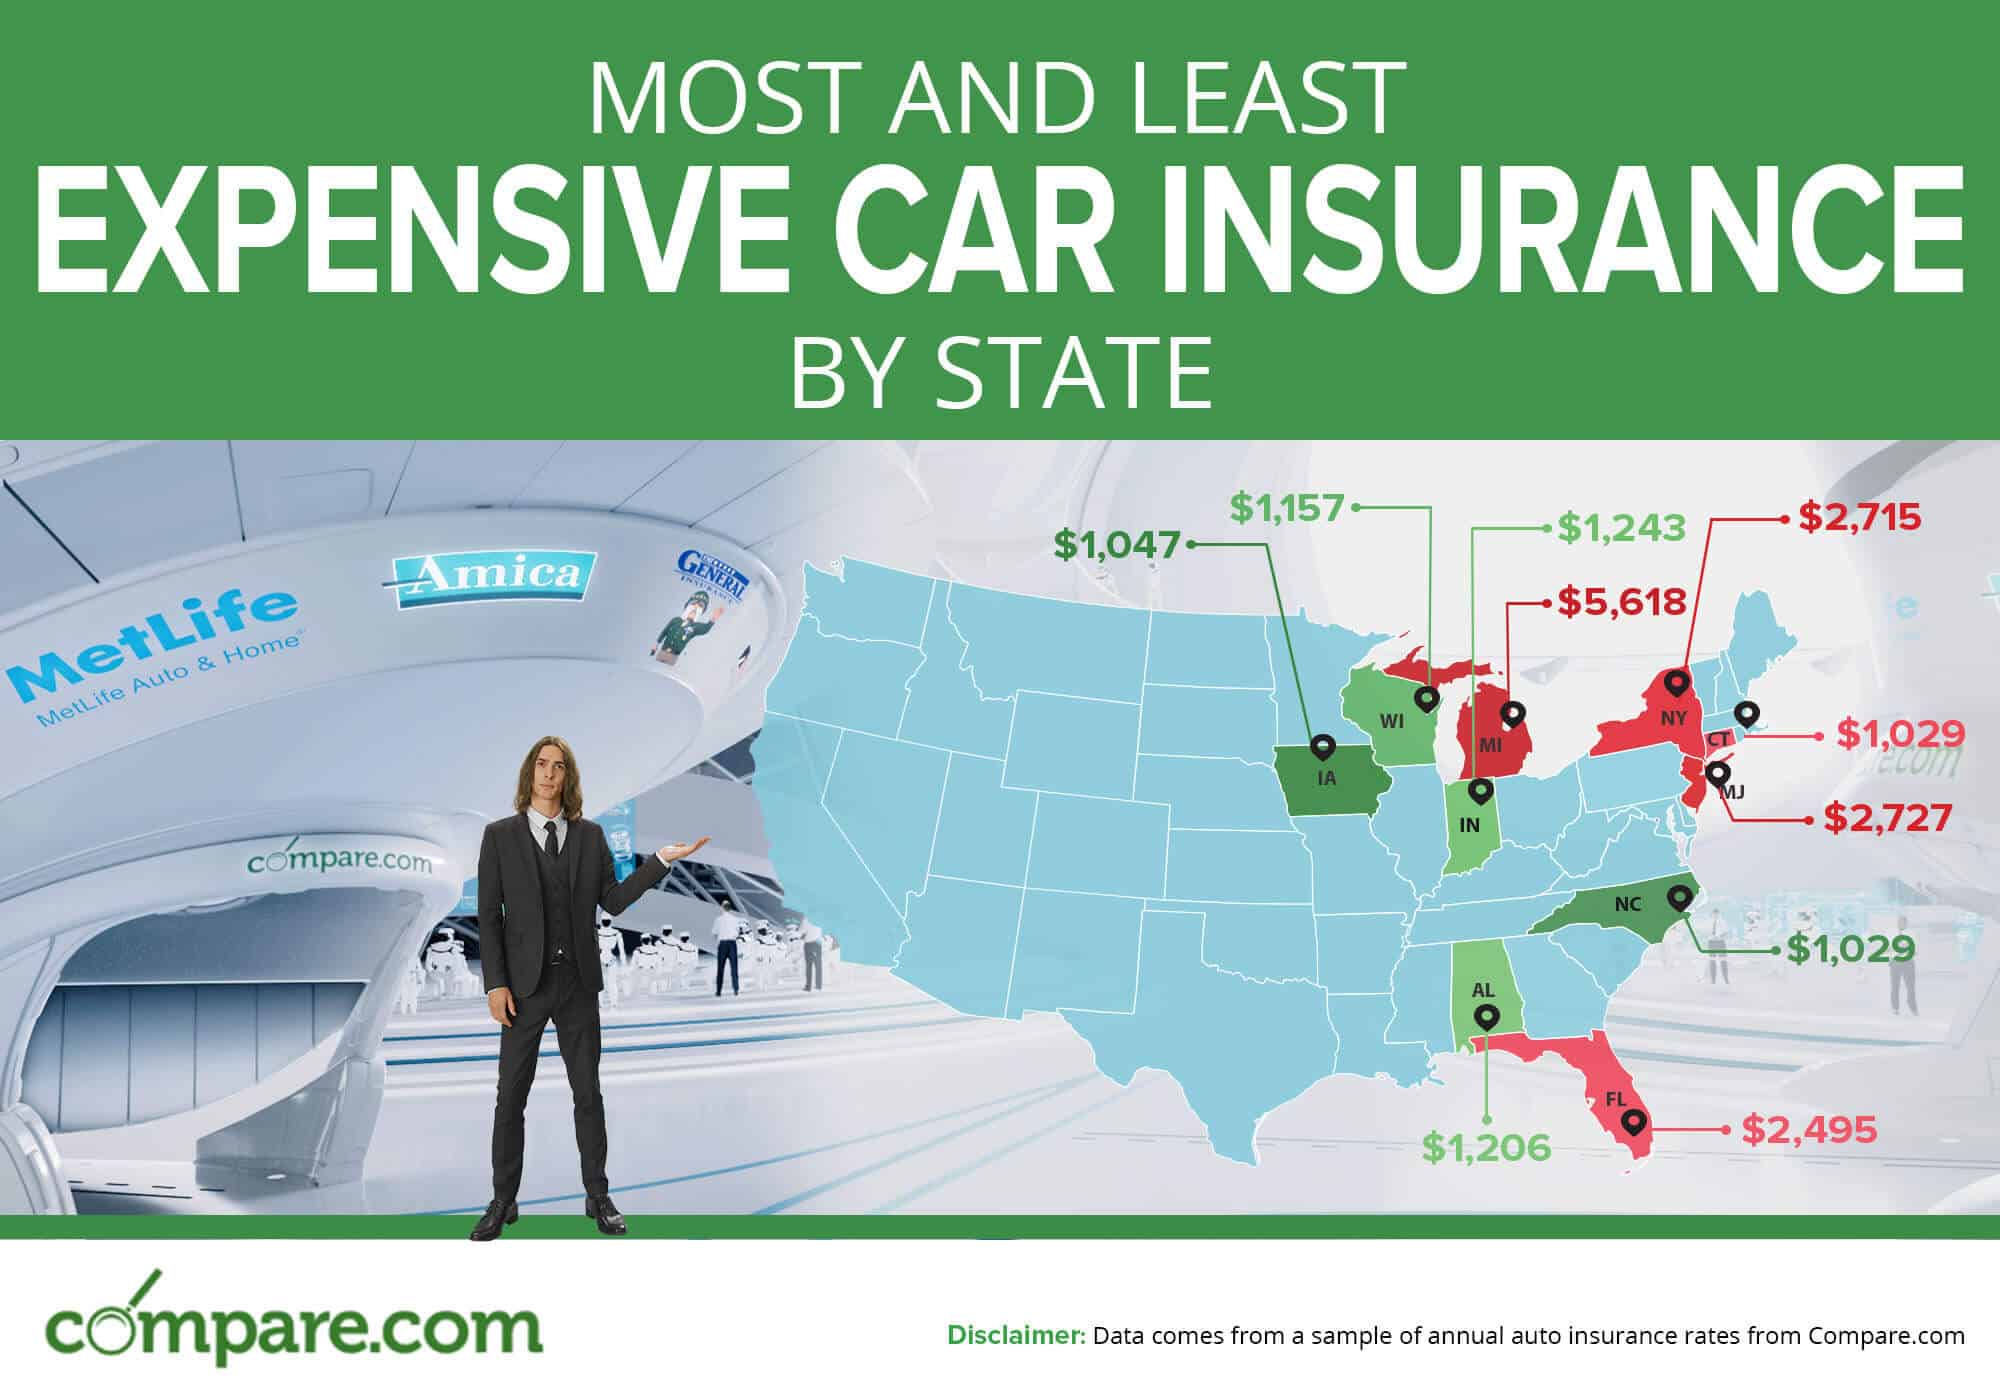 Most and Least Expensive States for Car Insurance